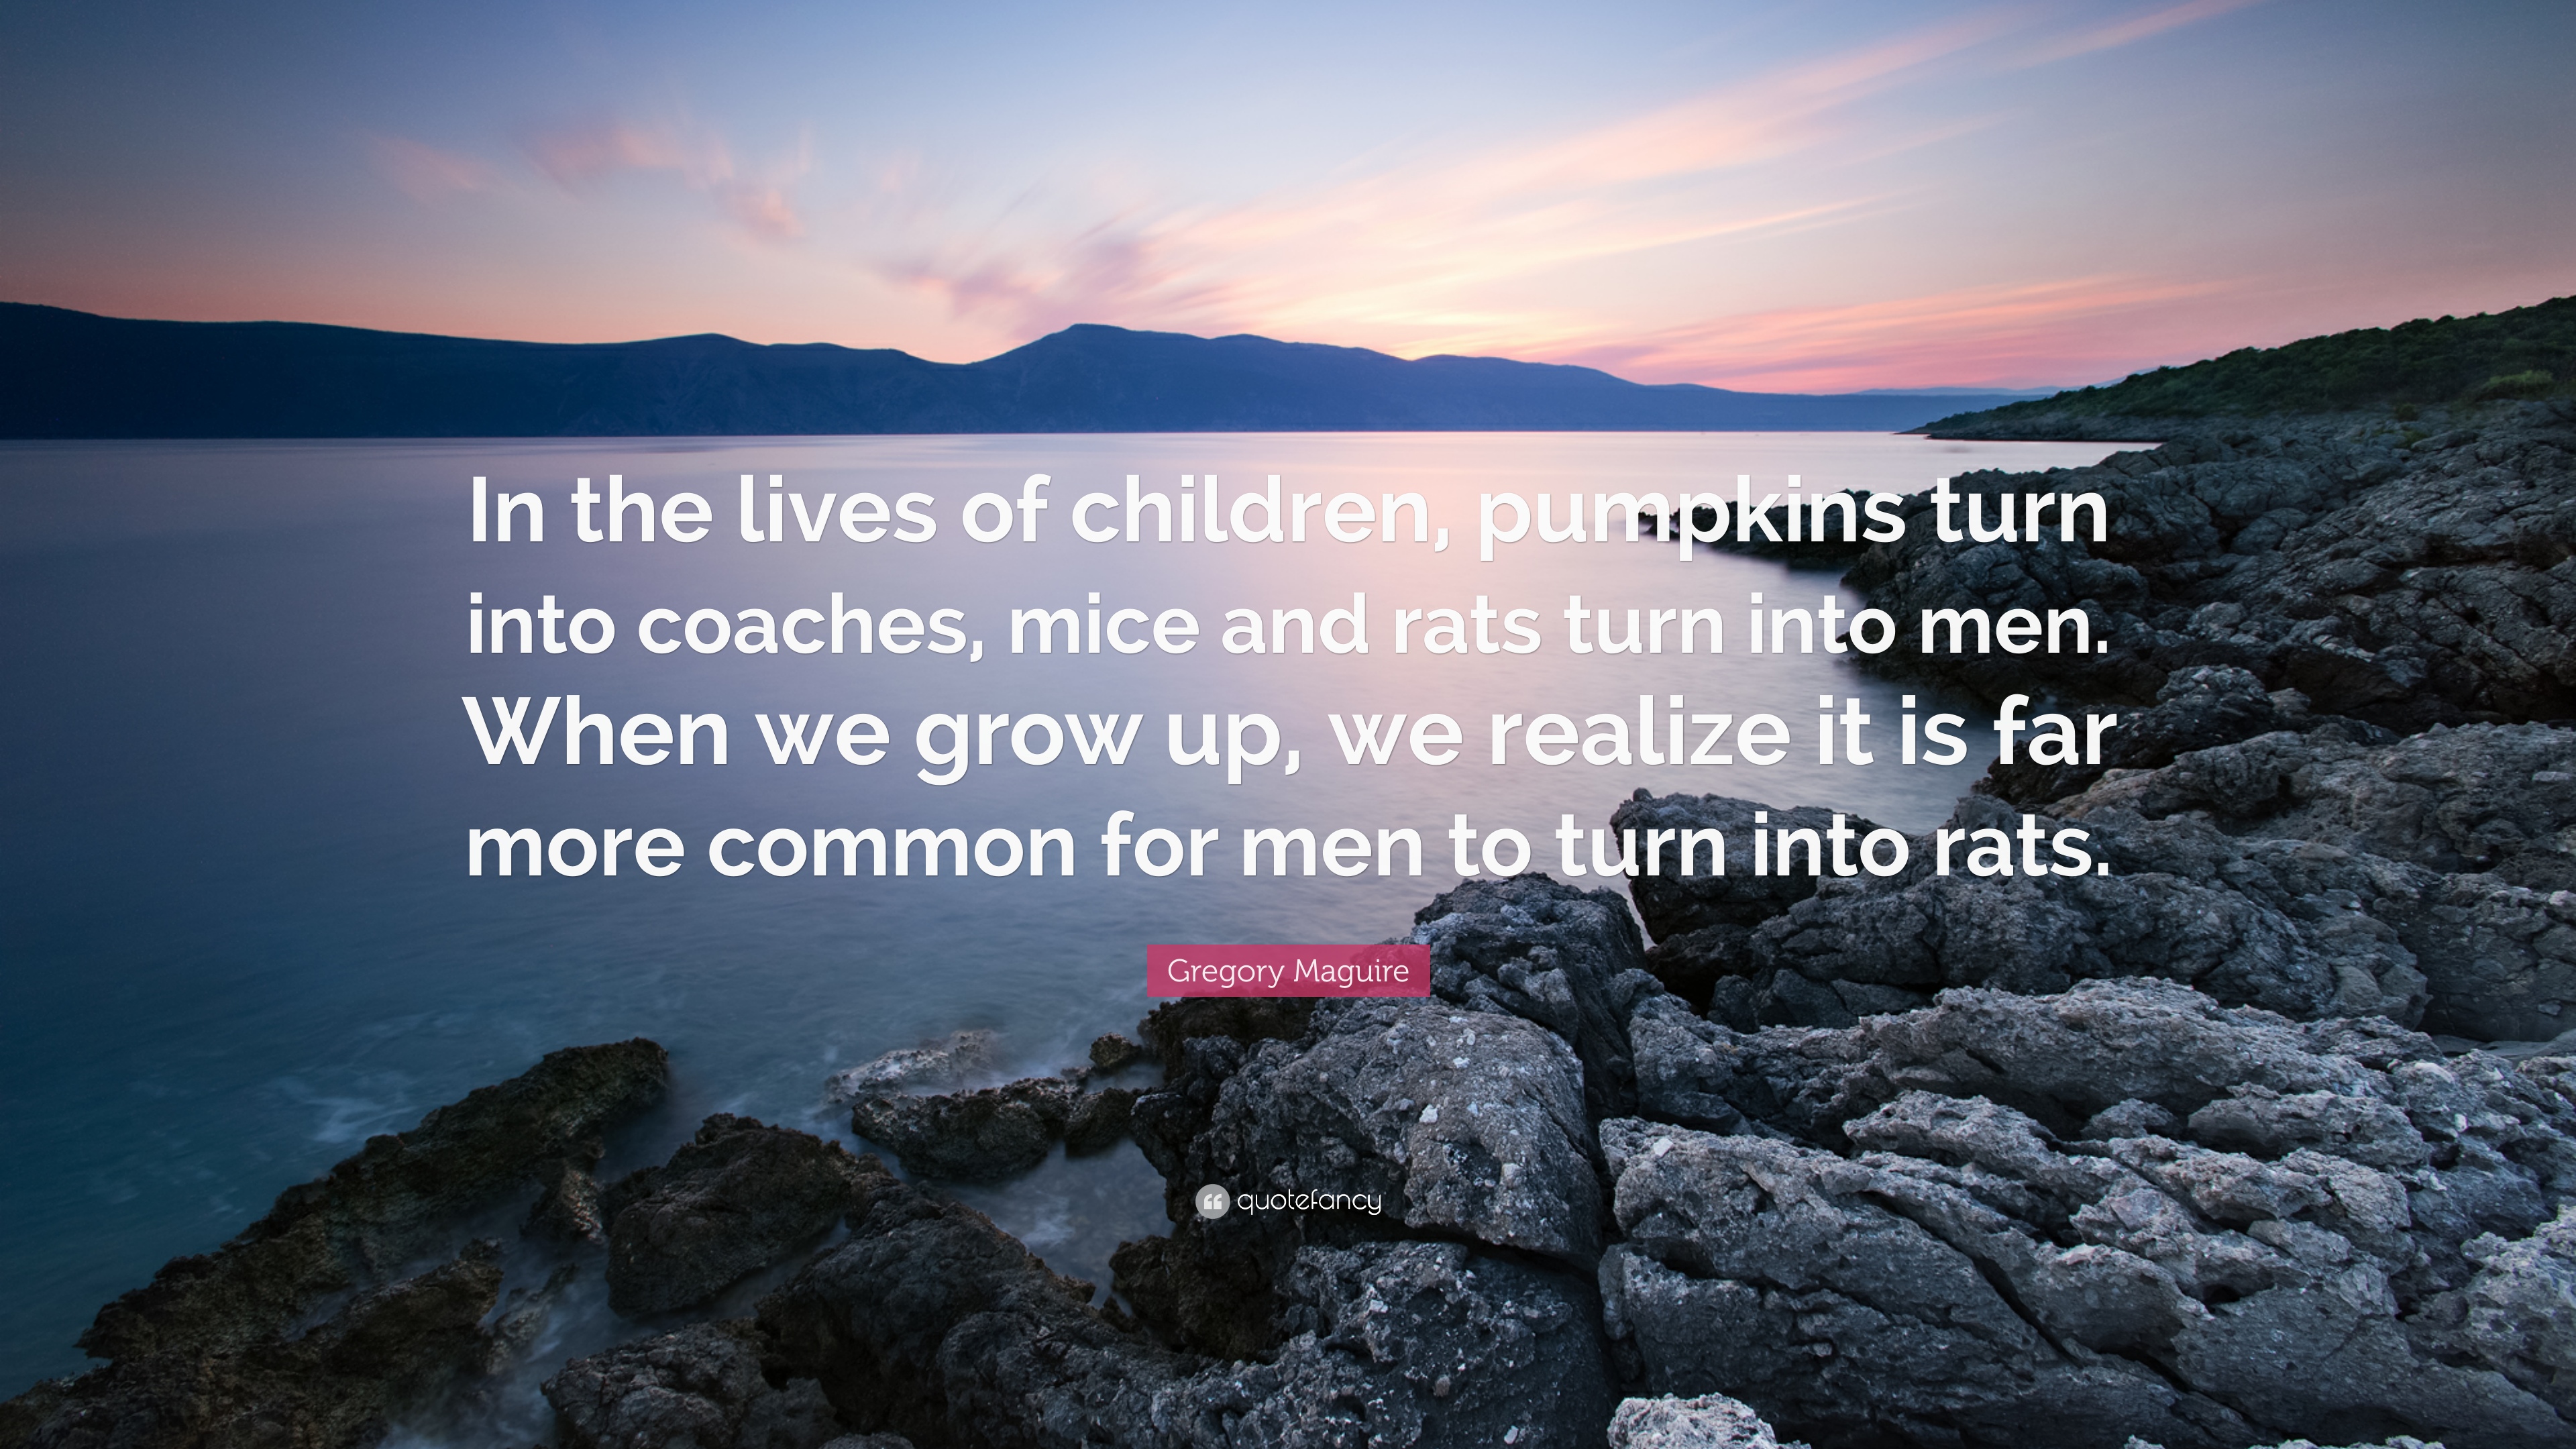 Gregory Maguire Quote: “In the lives of children, pumpkins turn